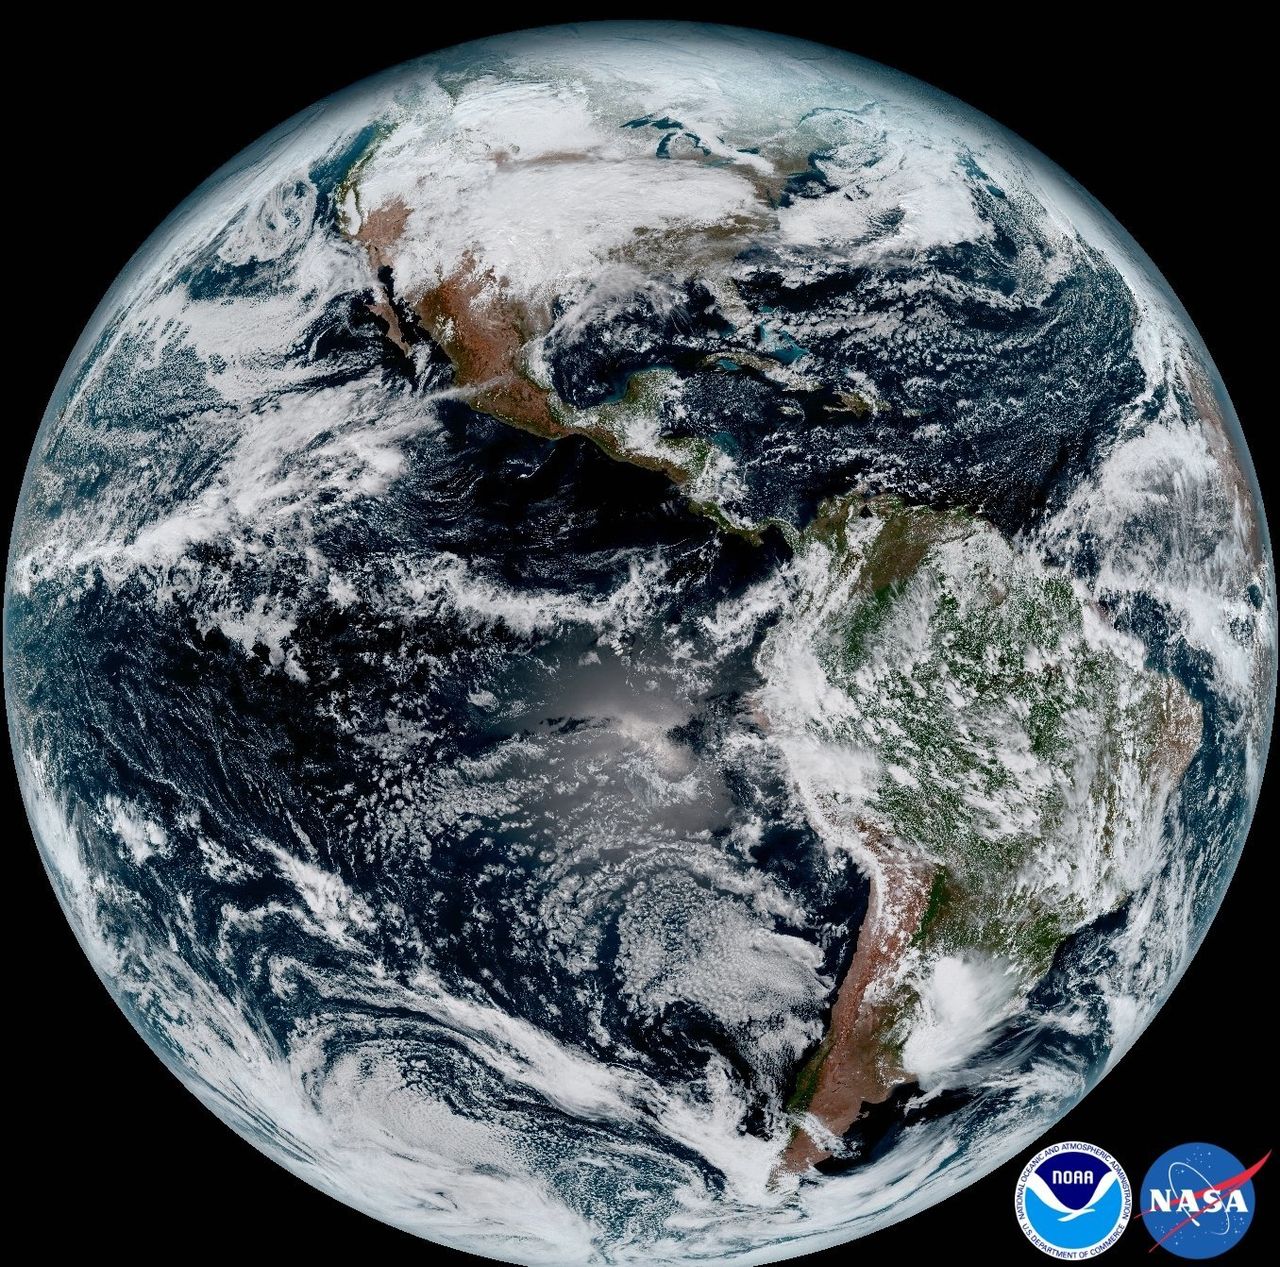 This composite color full-disk visible image was created using several of the 16 spectral channels available on the GOES-16 Advanced Baseline Imager (ABI) instrument. The image shows North and South America and the surrounding oceans.